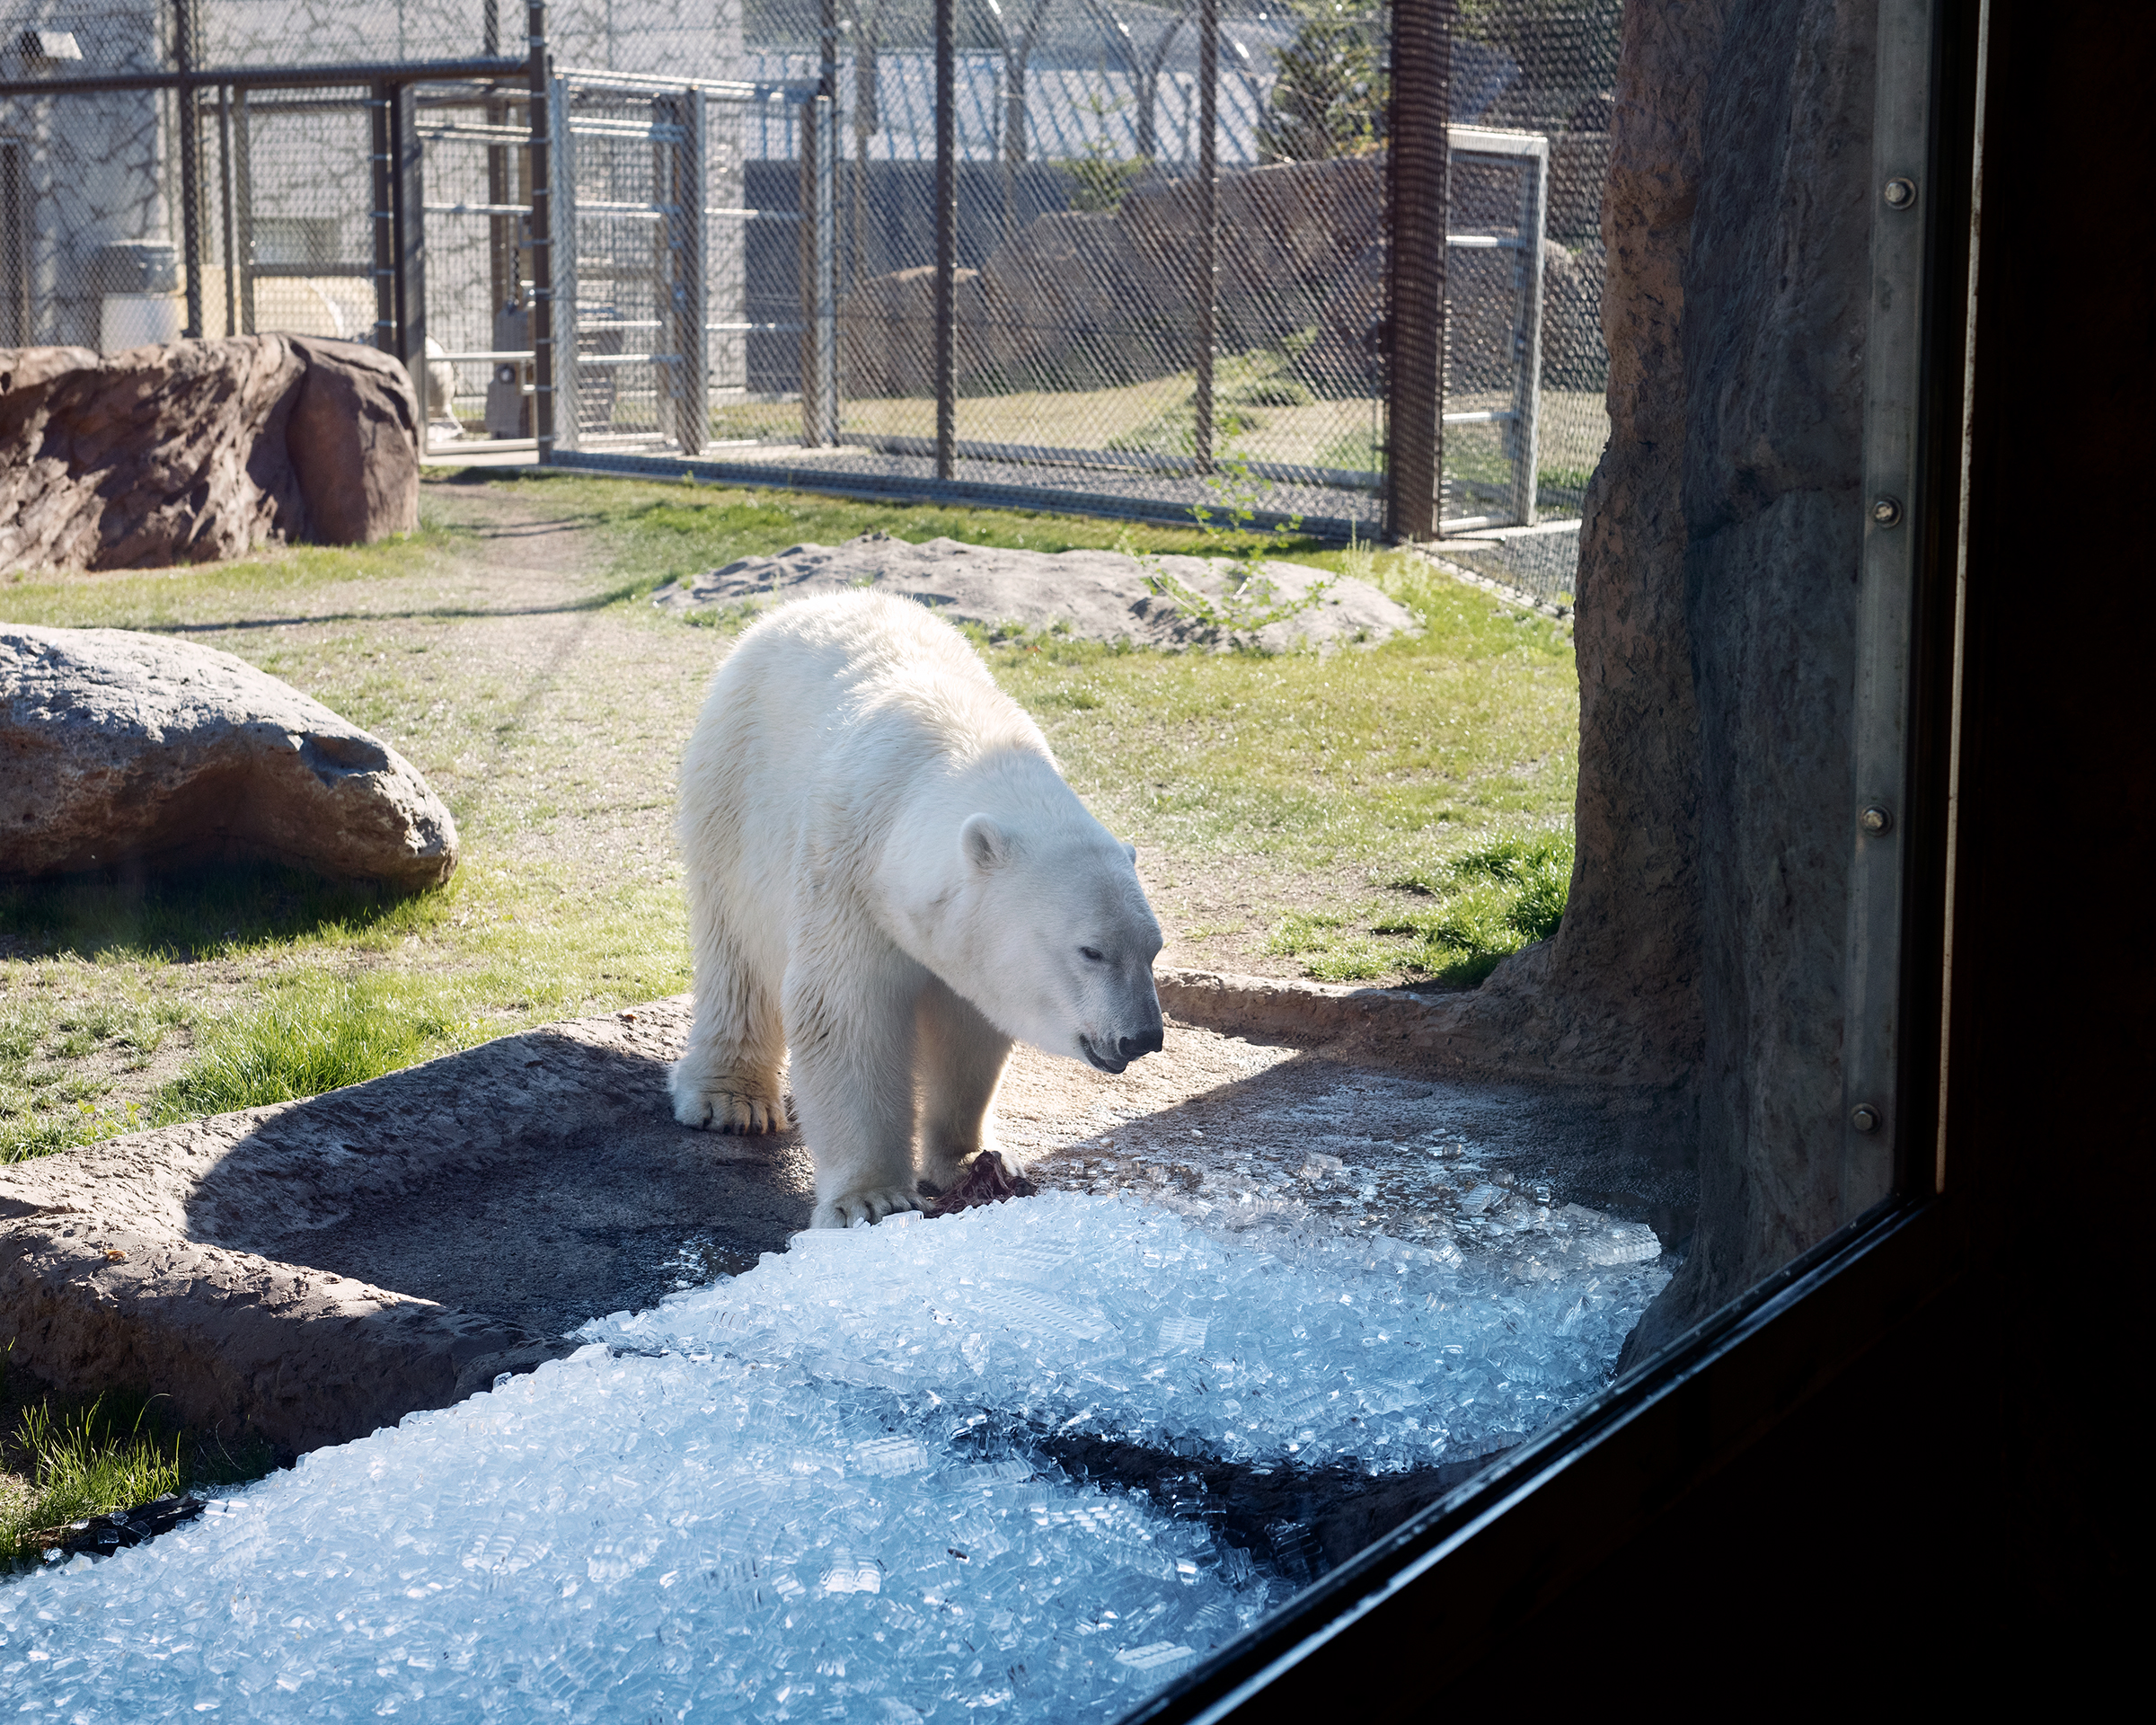 Nora, <a href="https://time.com/extreme-heat-climate-change/">a polar bear</a>, is seen in the Polar Bear Passage exhibit at the Oregon Zoo in Portland, on June 28. (Adam Ferguson for TIME)